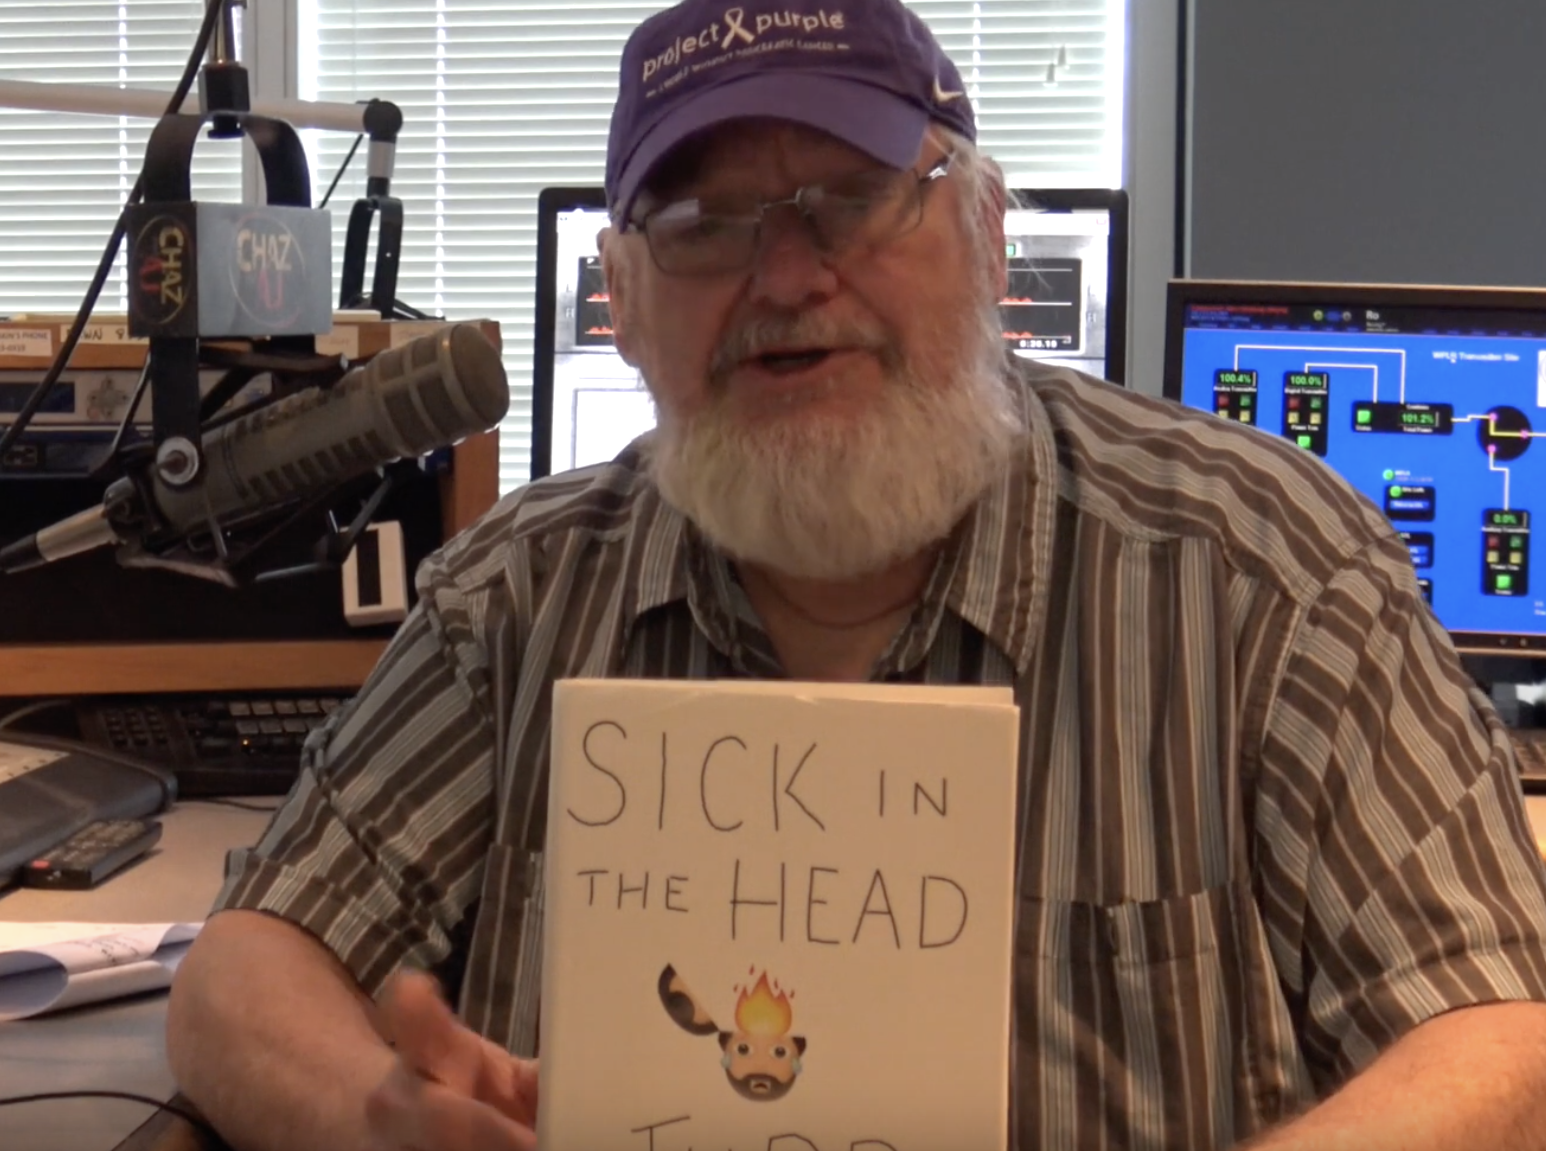 Wiggy’s Book of the Week: Sick in the Head